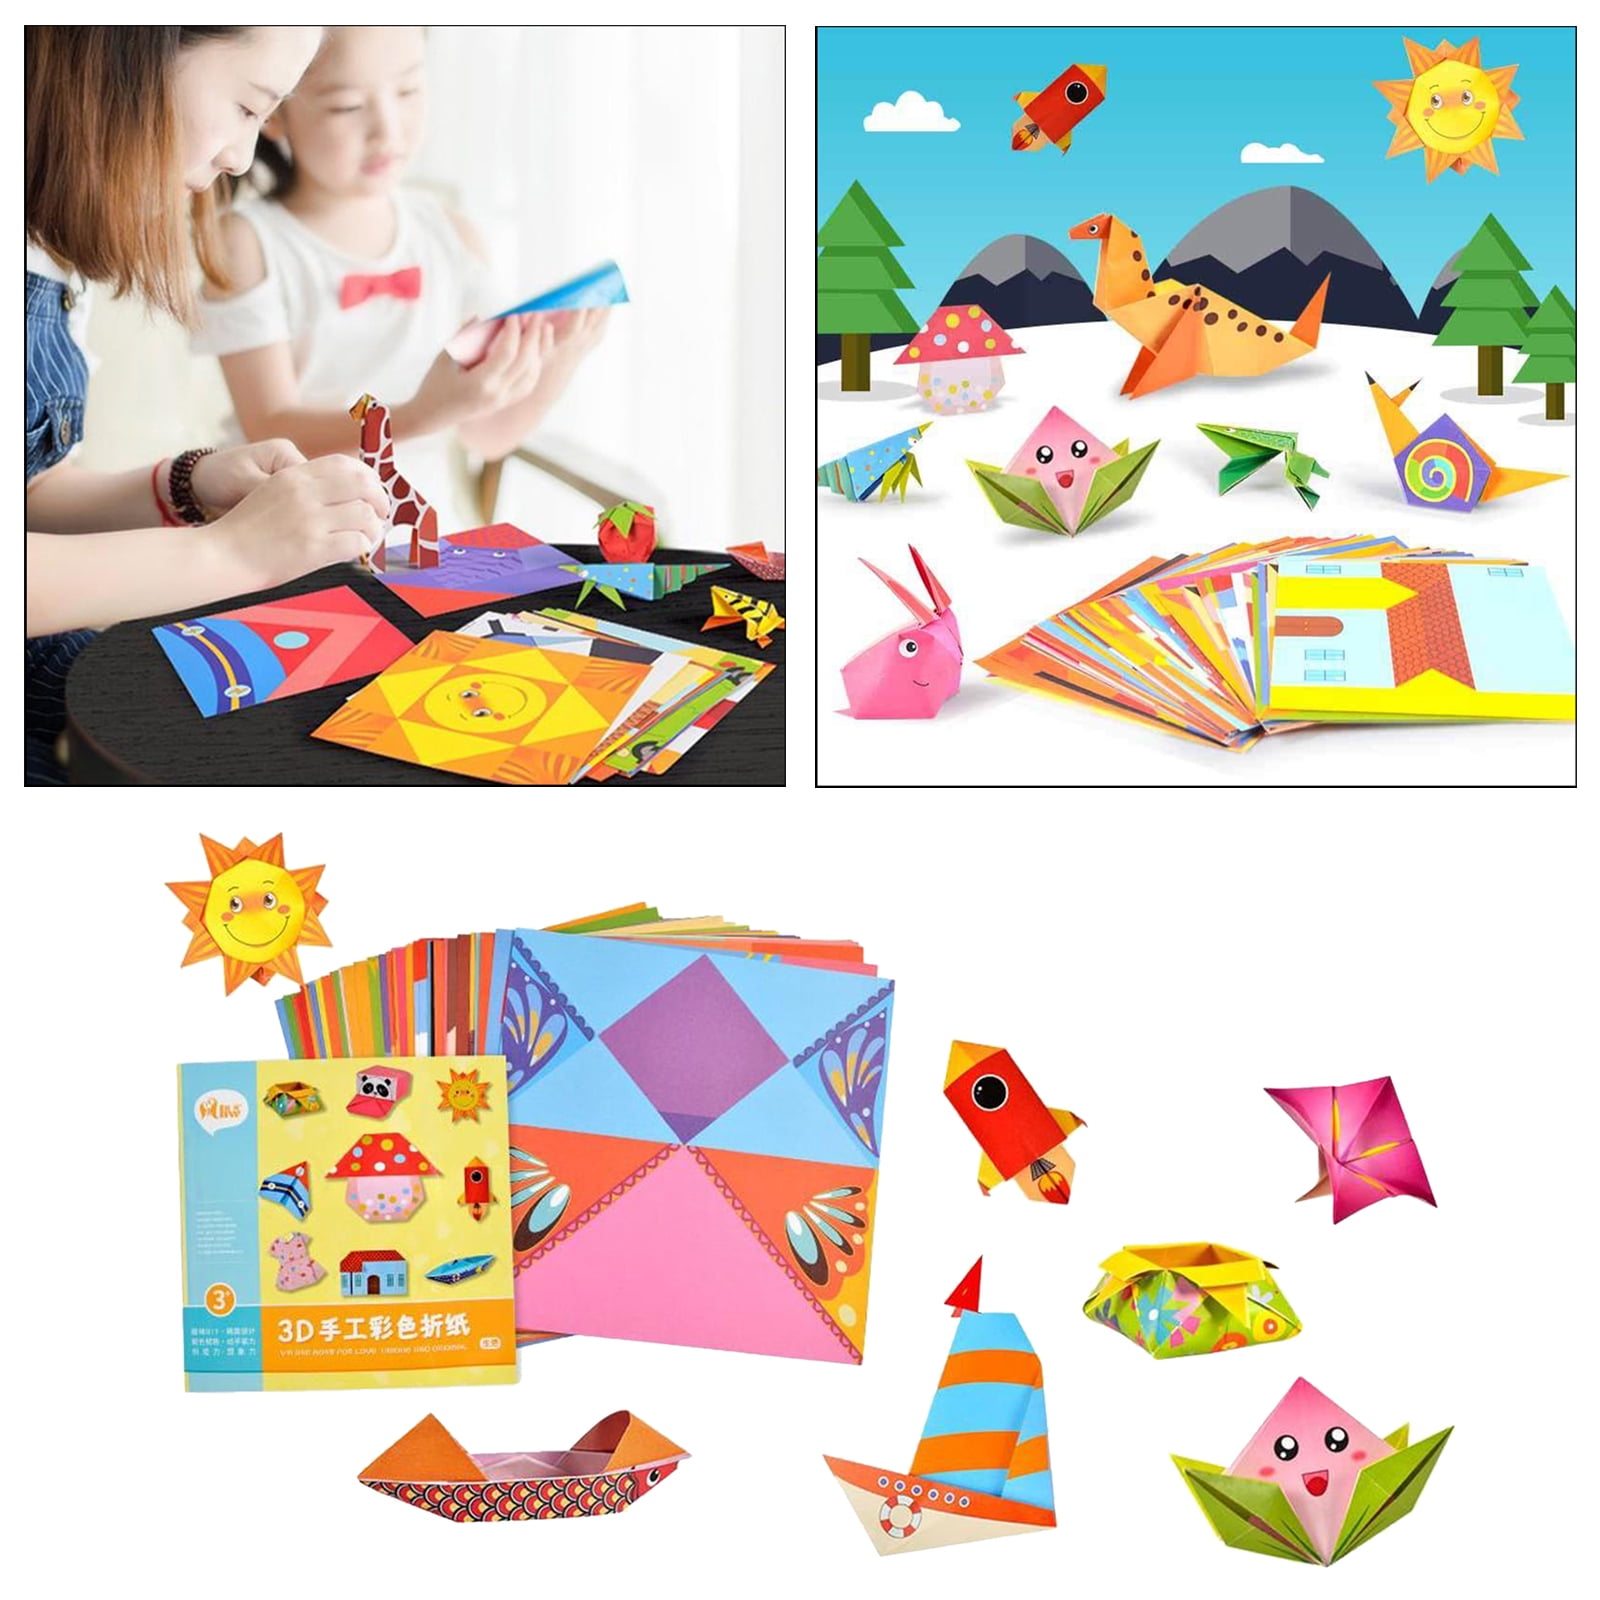 Origami Kit 54 Sheets for Craft Lessons, Kids DIY Crafts Origami Paper for Kids 